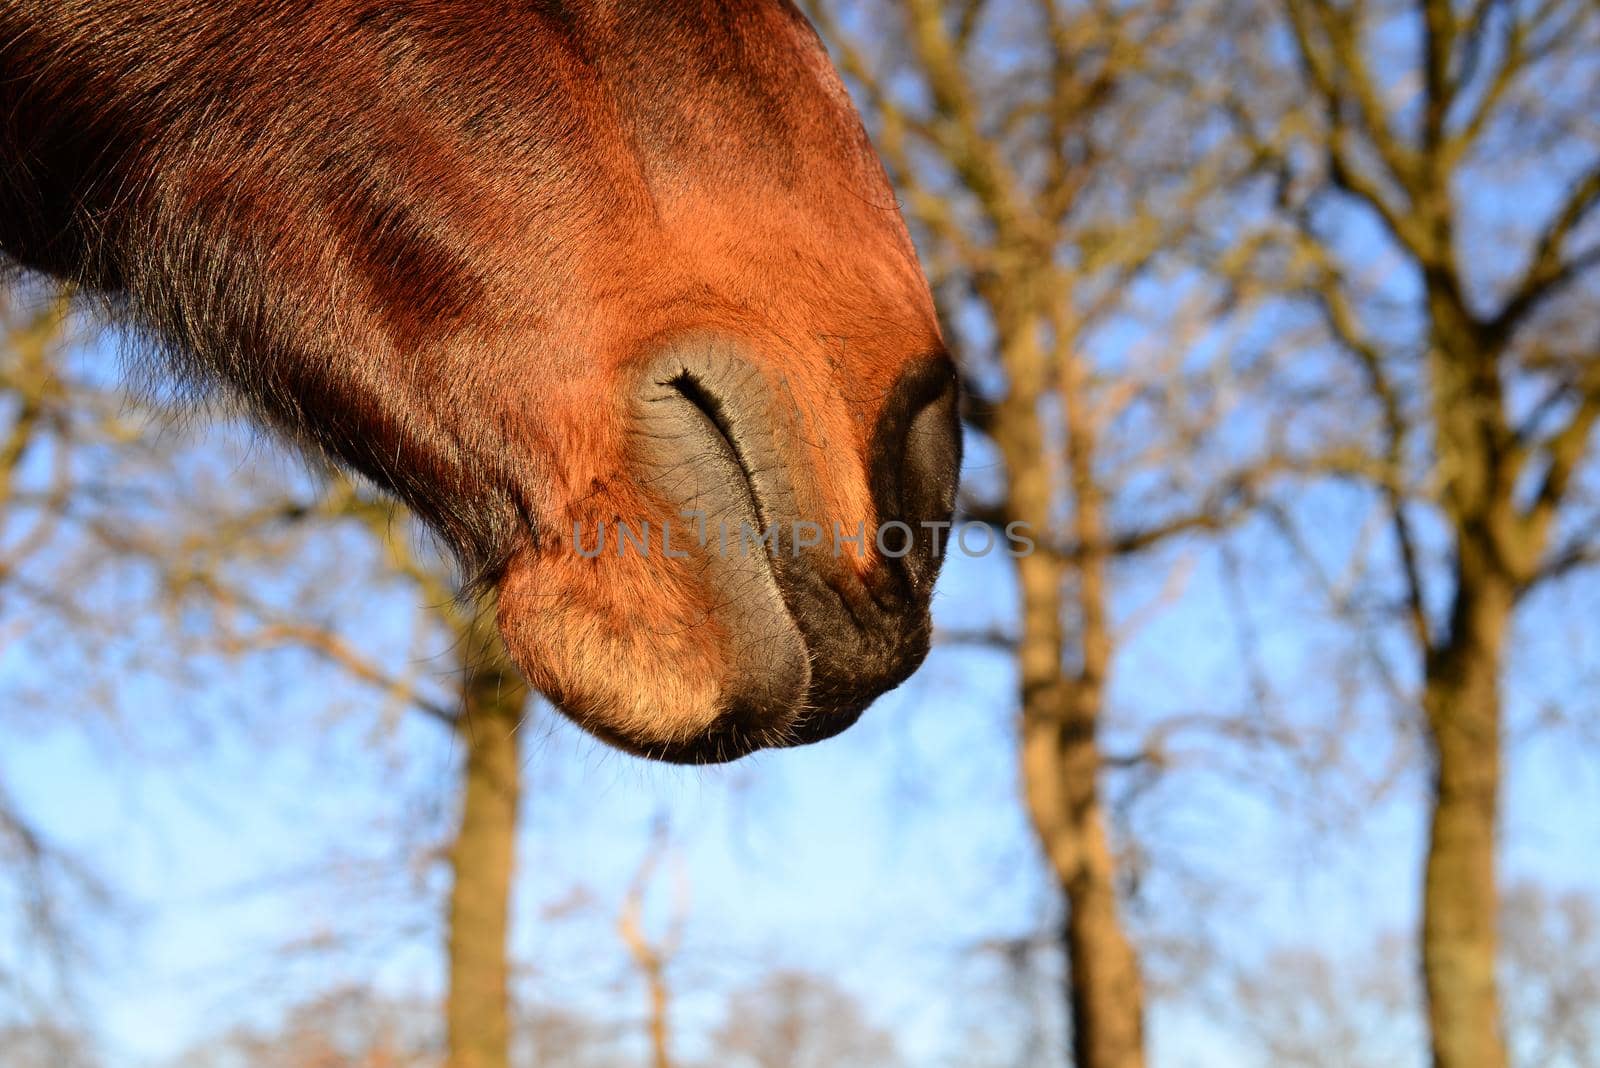 The mouth of a brown horse from the right side as a close up